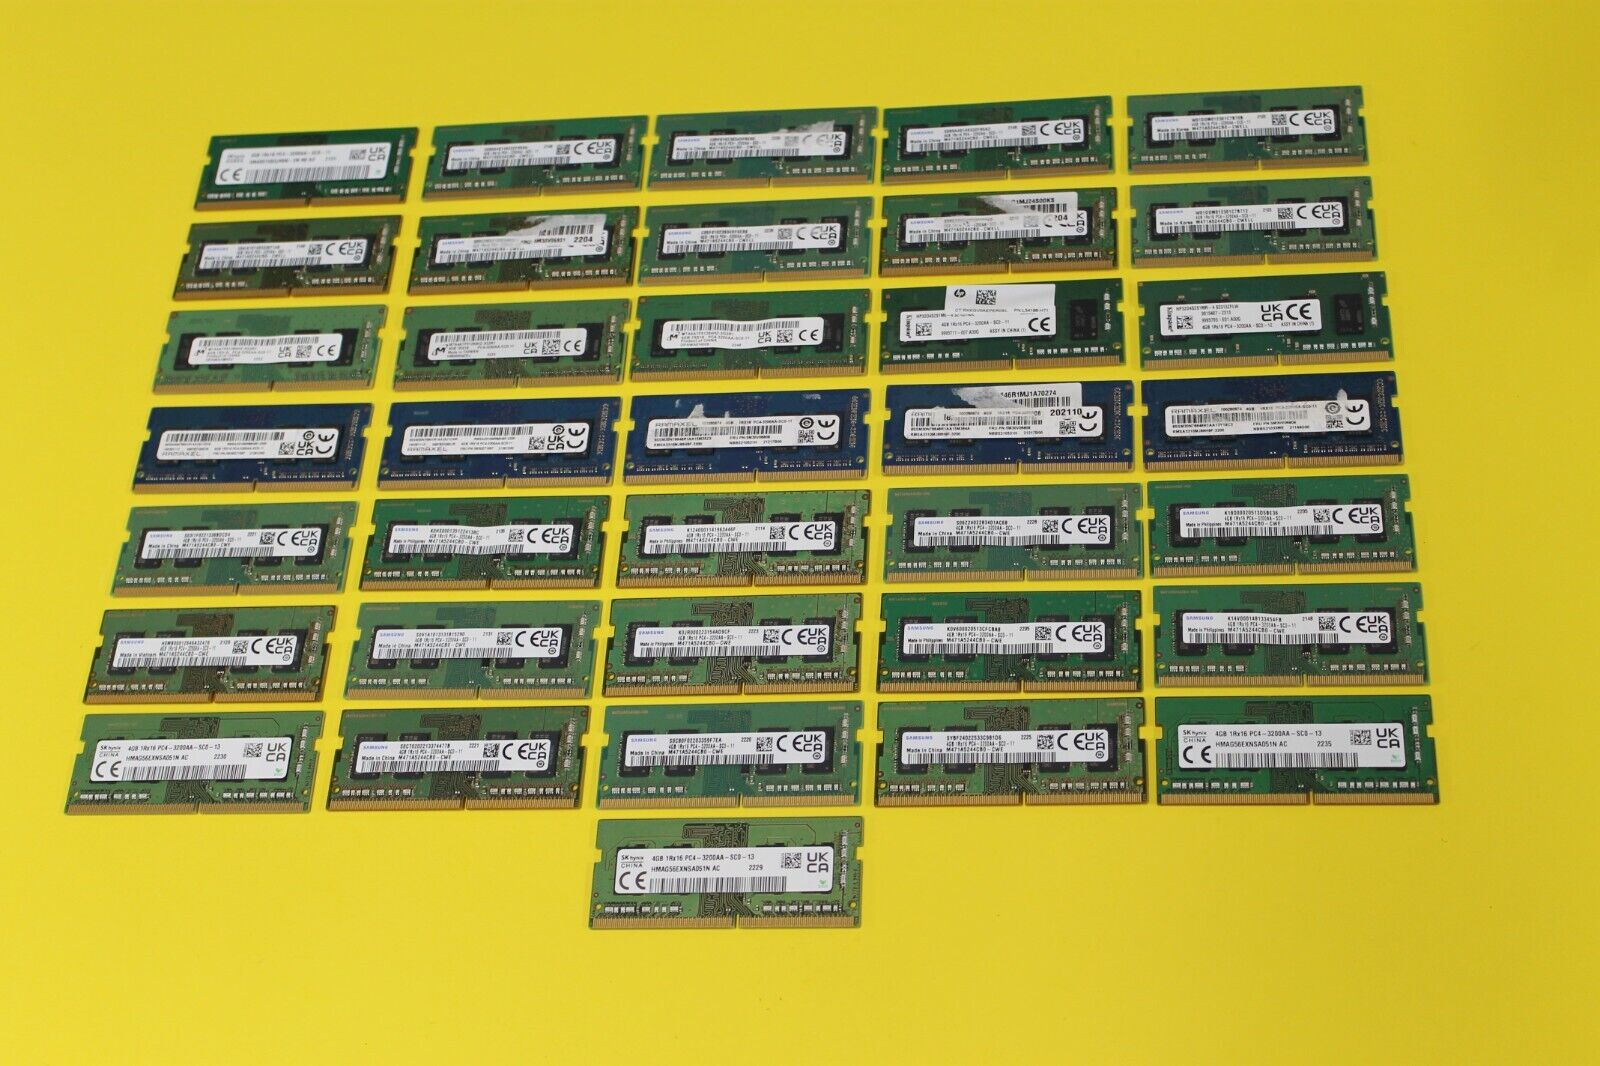 LOT OF 36 4GB MIXED BRANDS 1Rx16 PC4-25600 DDR4 3200 MHz SODIMM Laptop RAM